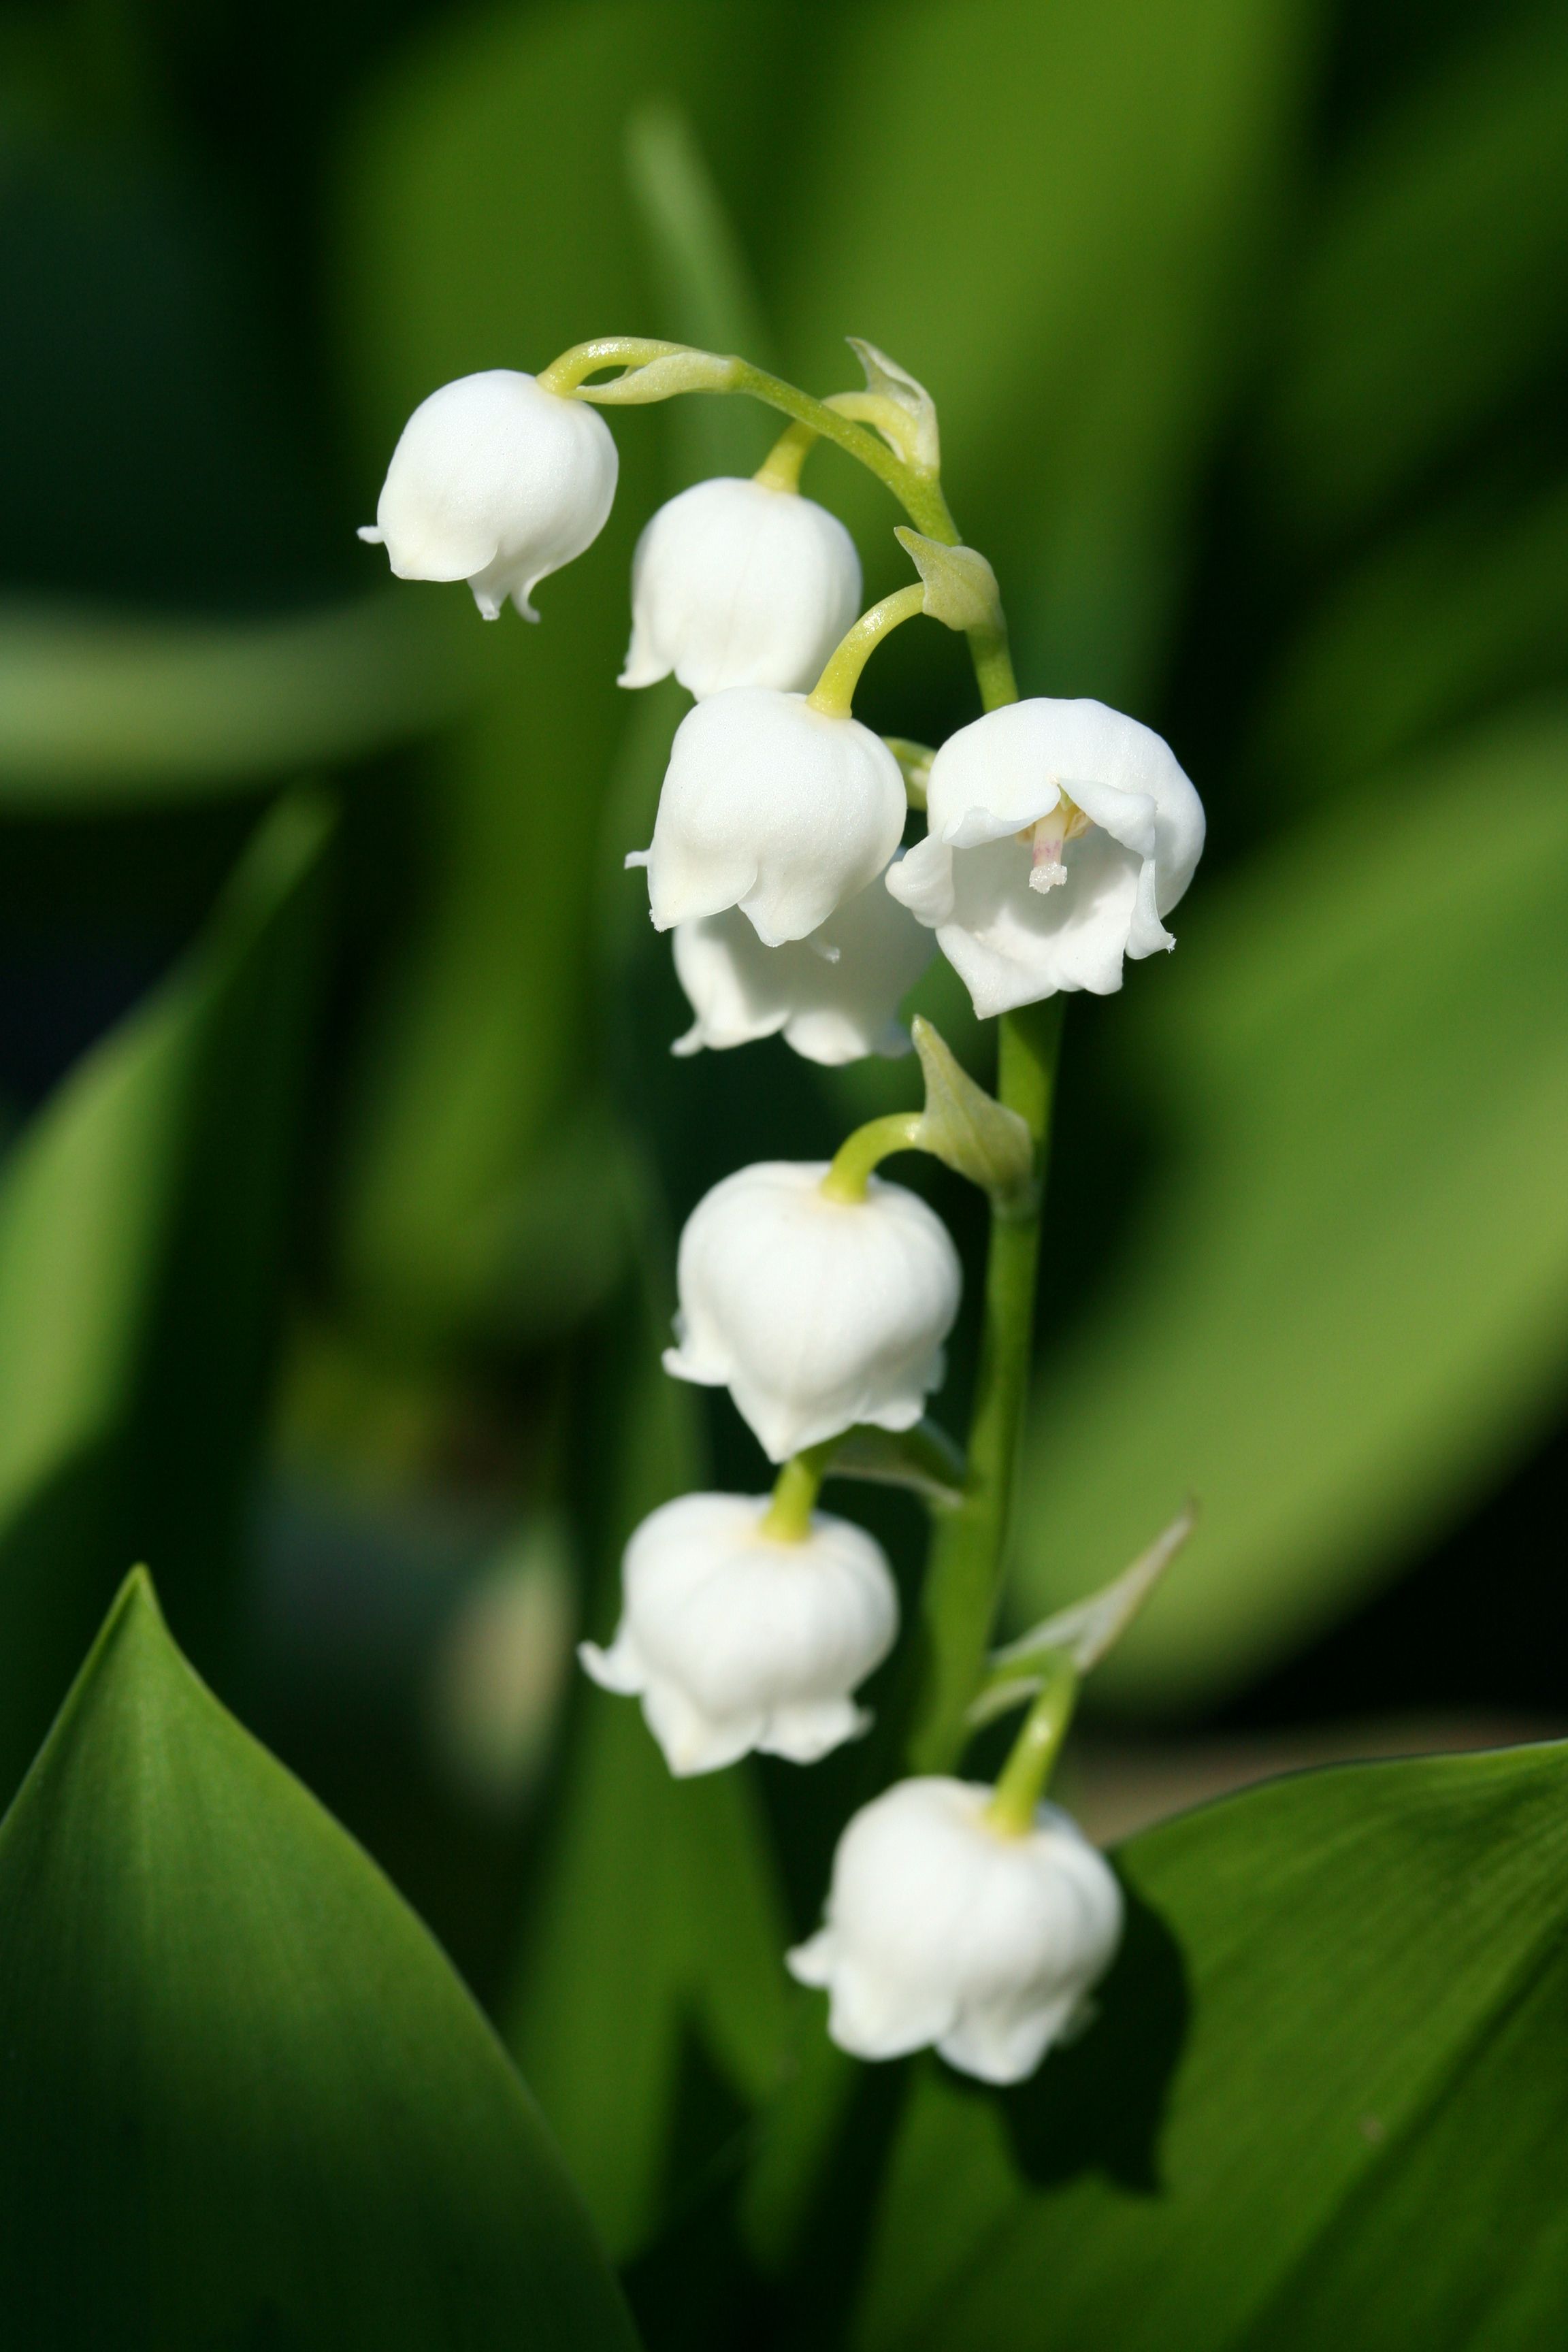 Lily of valley is flower for May 